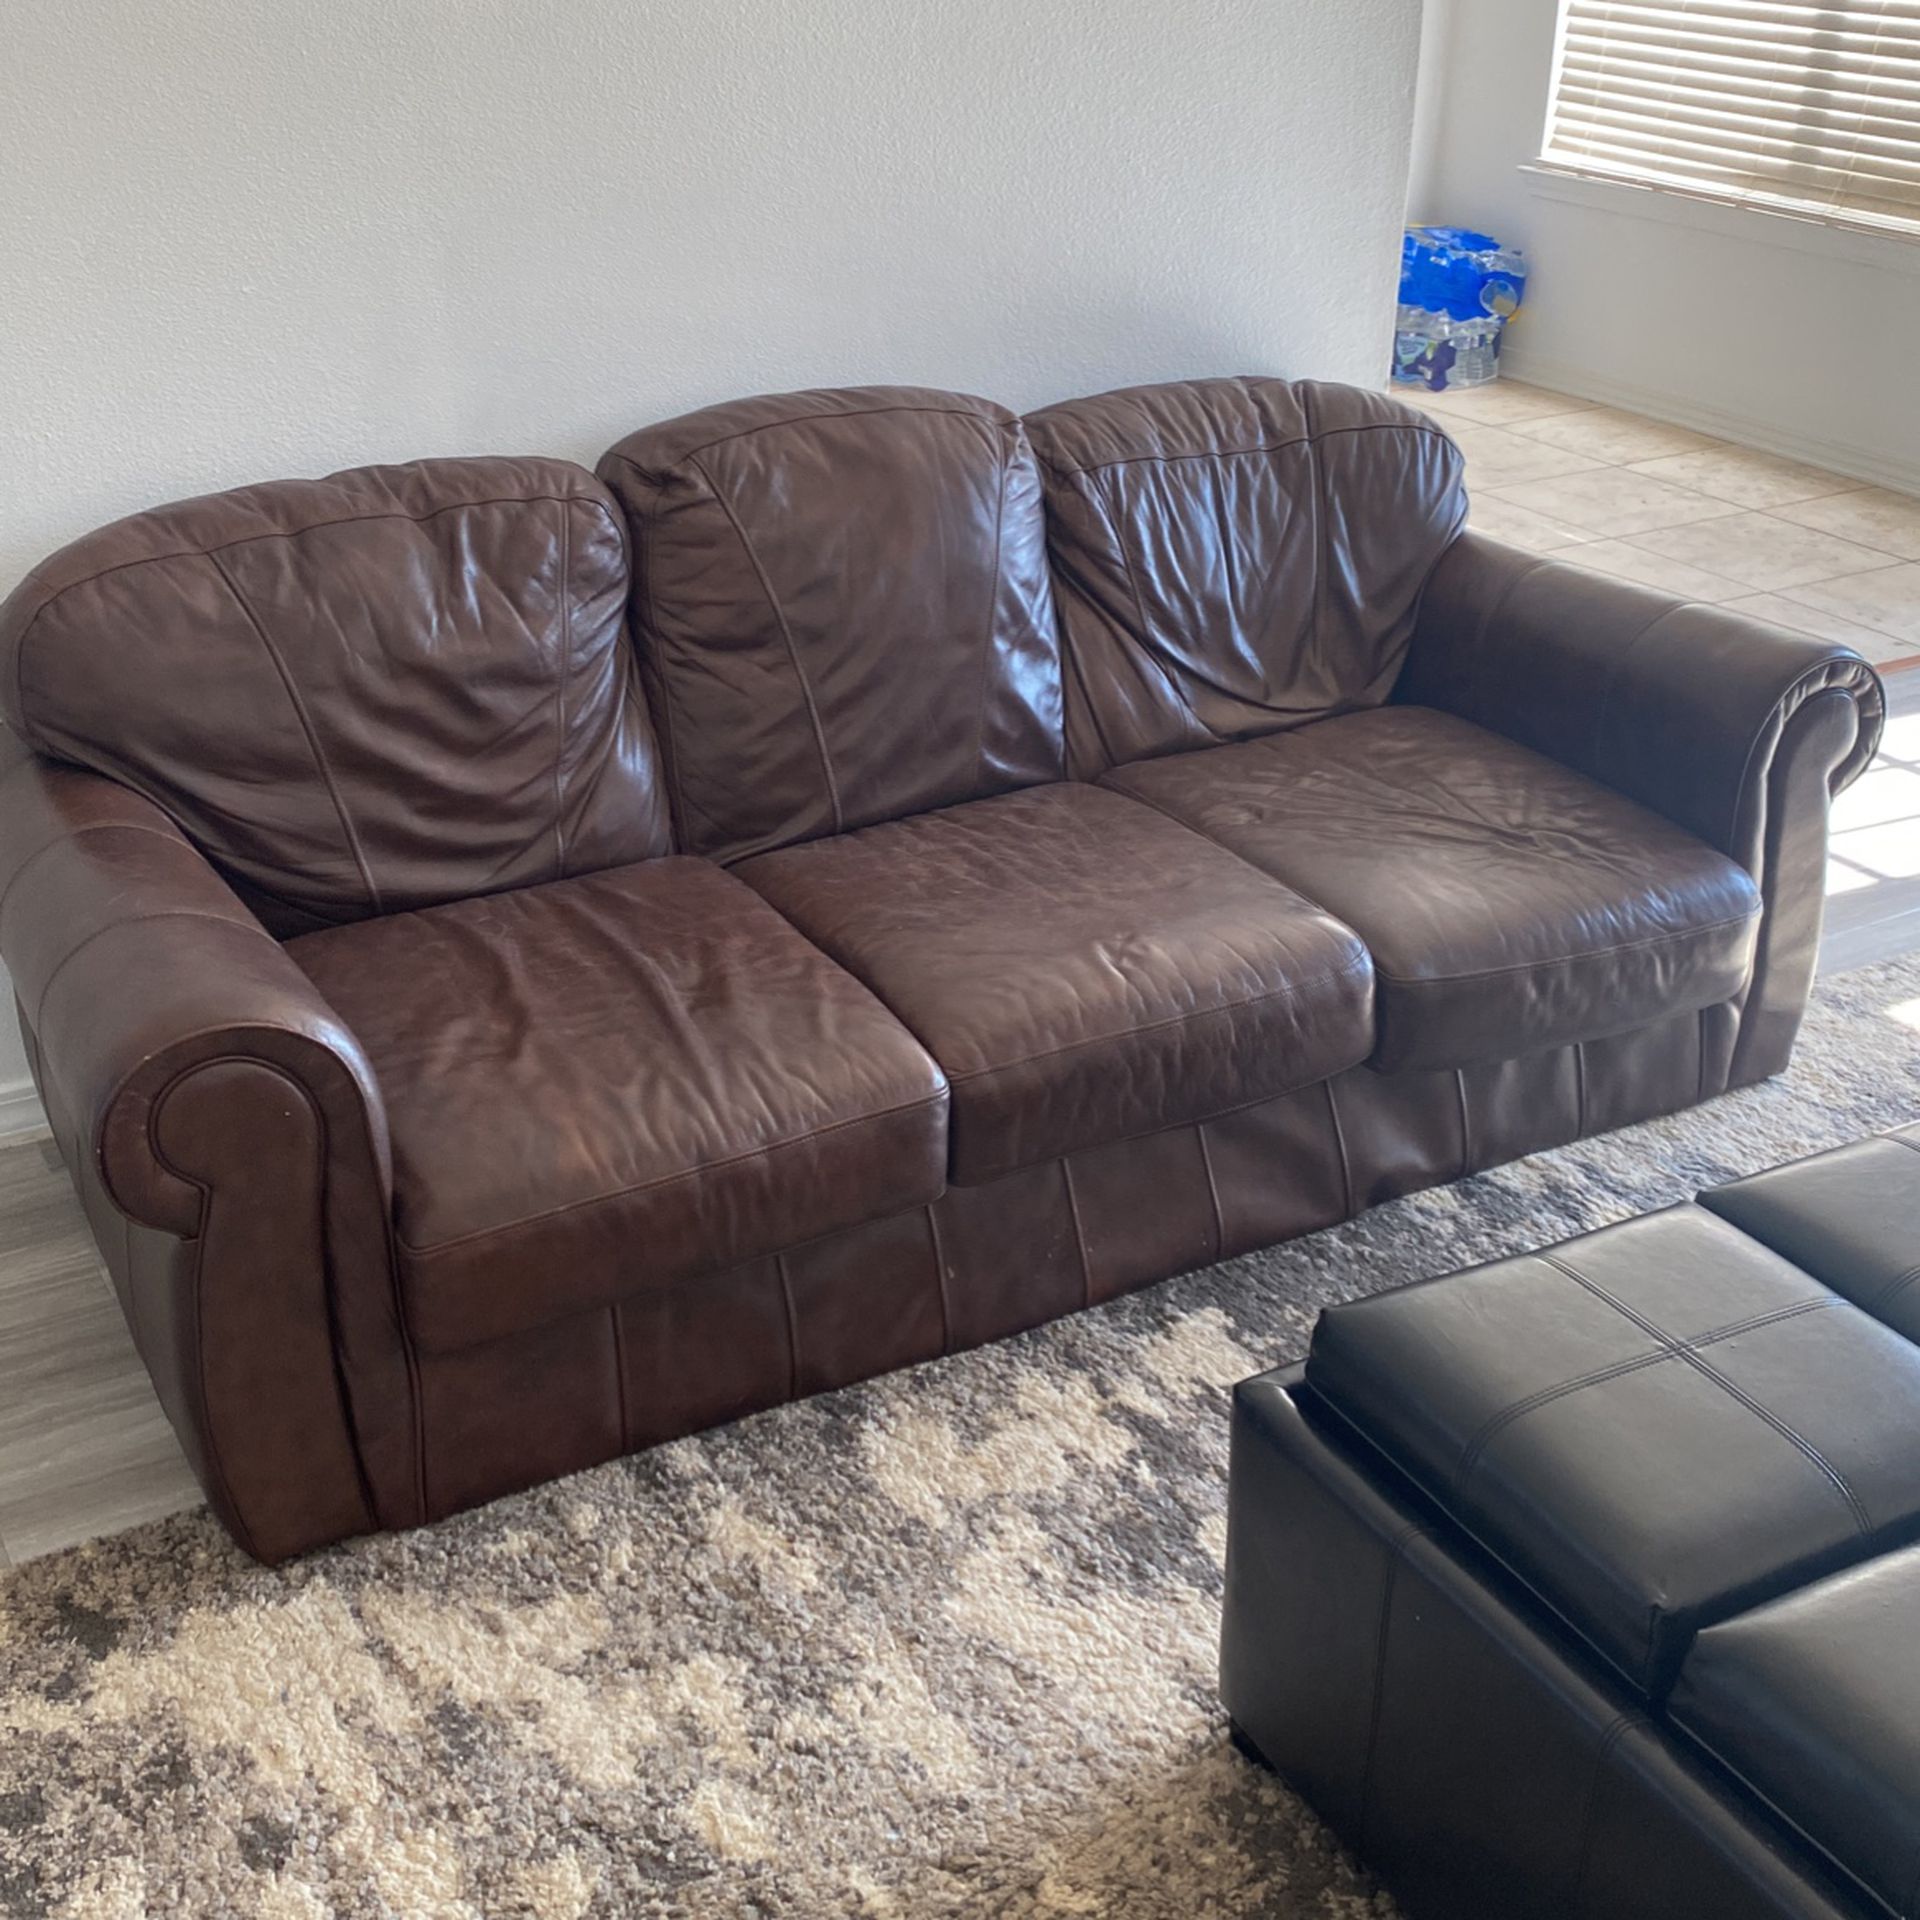 2 Couches & middle Cushion Storage Thing